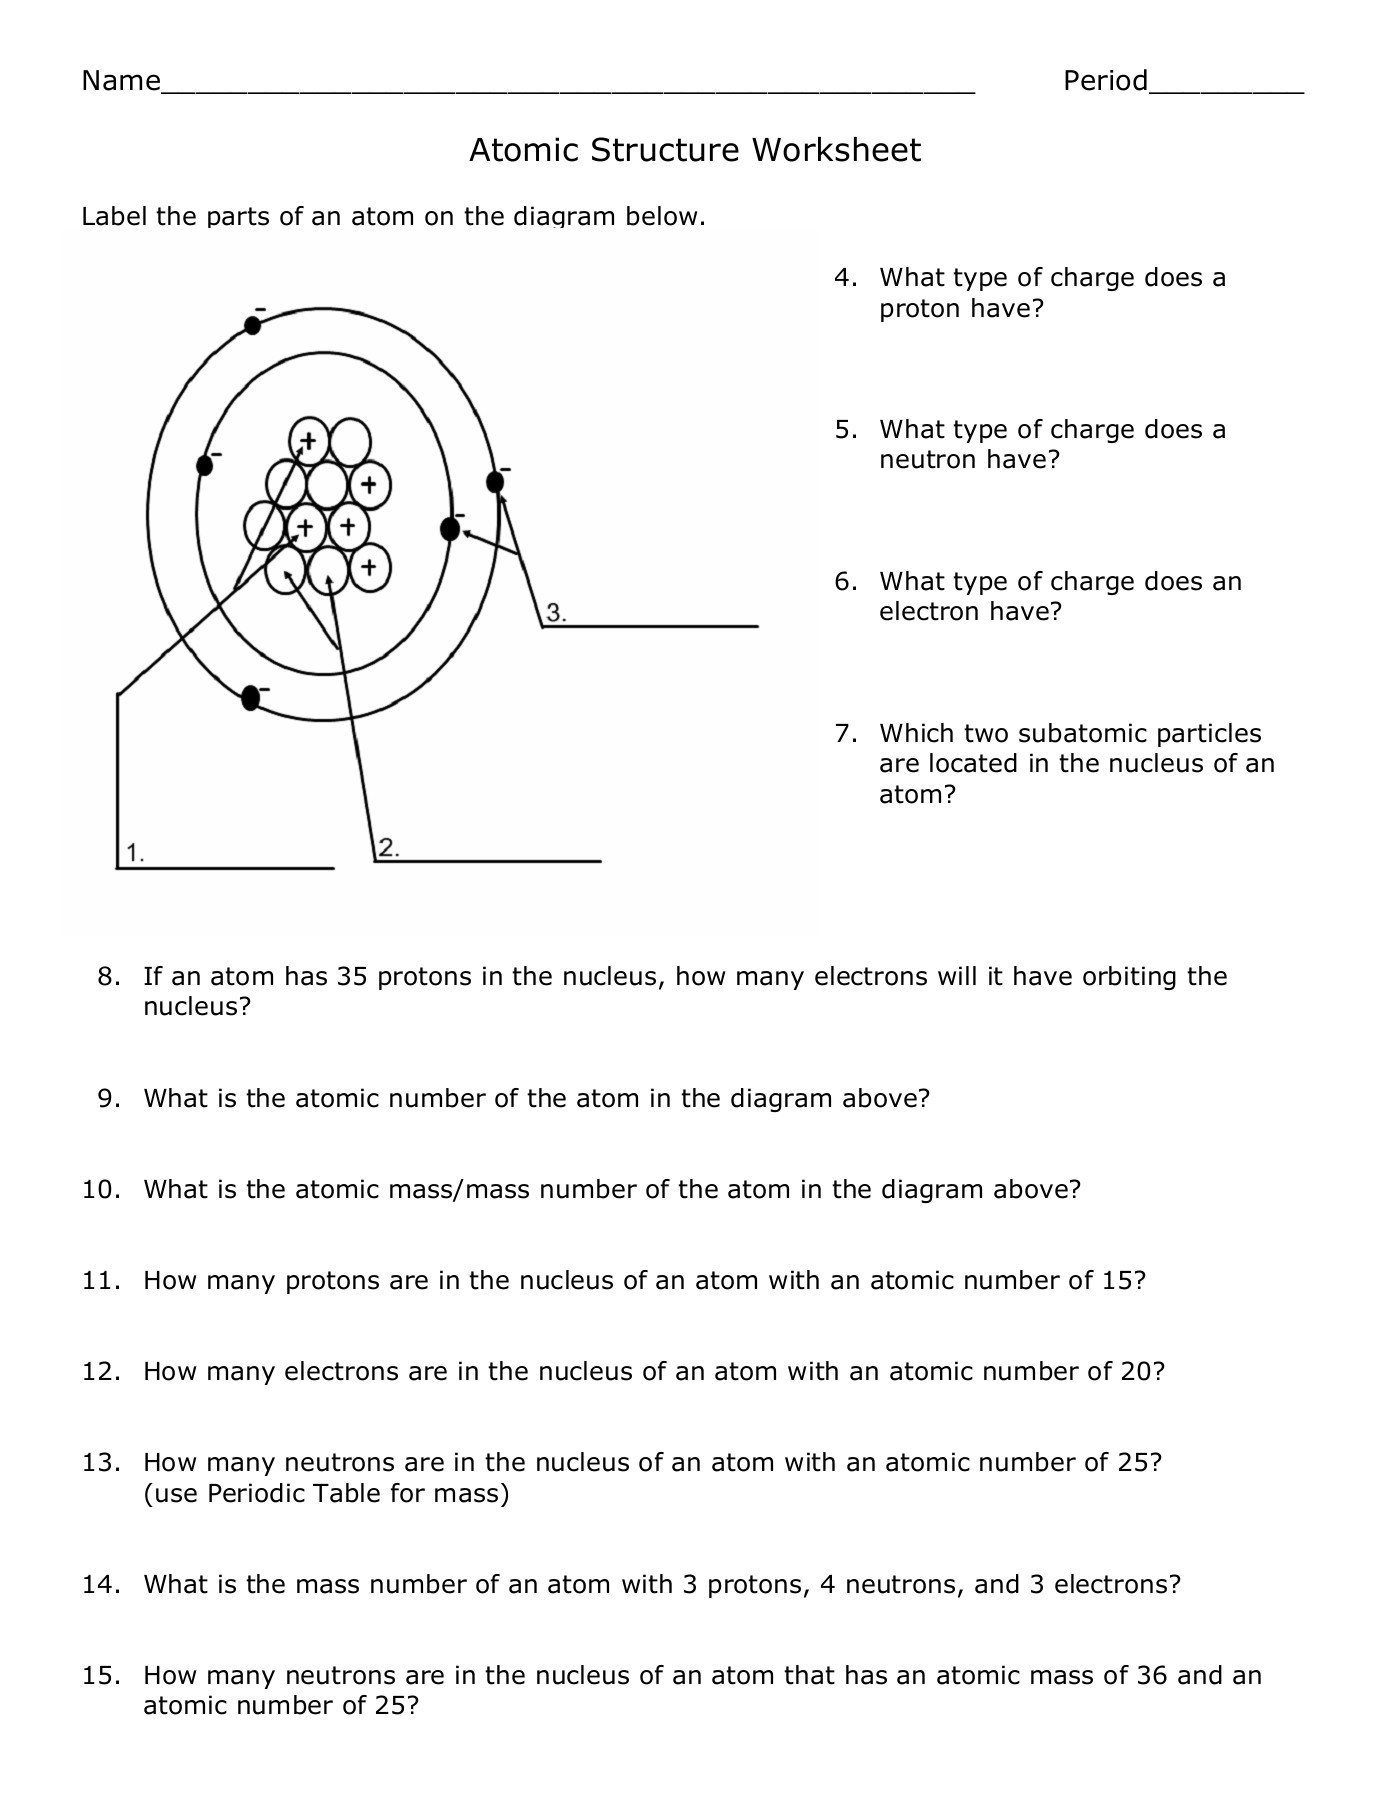 Drawing atoms Worksheet Answer Key atomic Structure Worksheet Shelby County Schools Pages 1